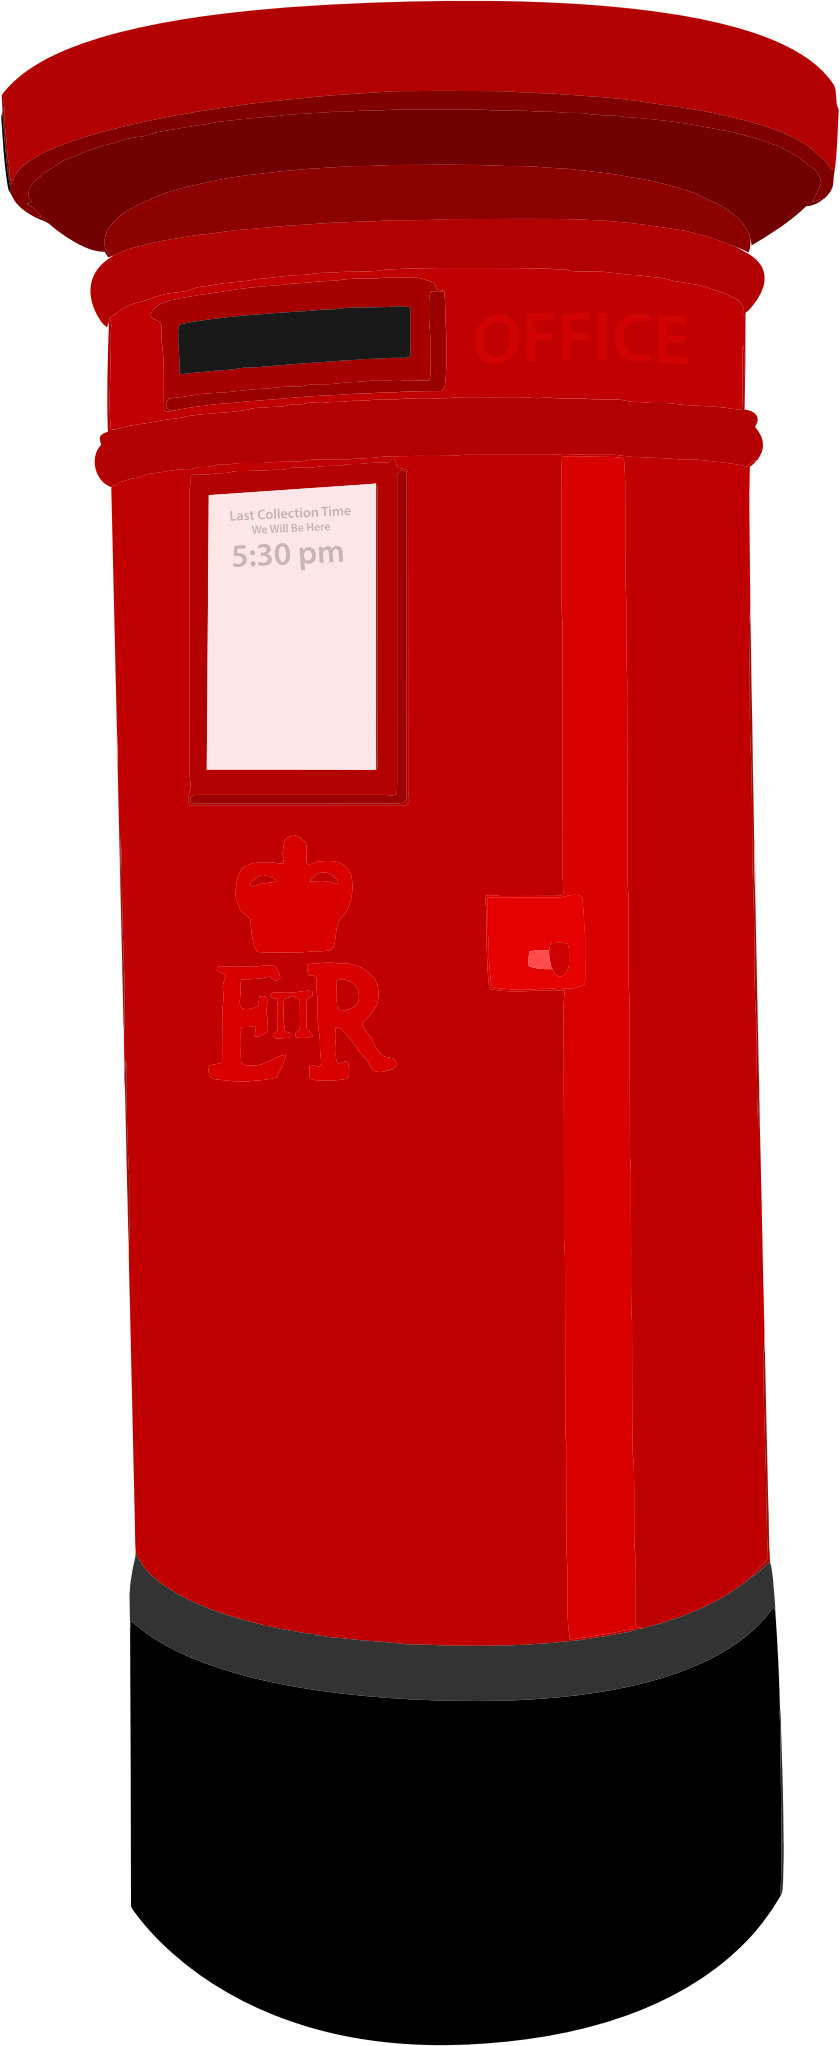 Post Box Clipart icons